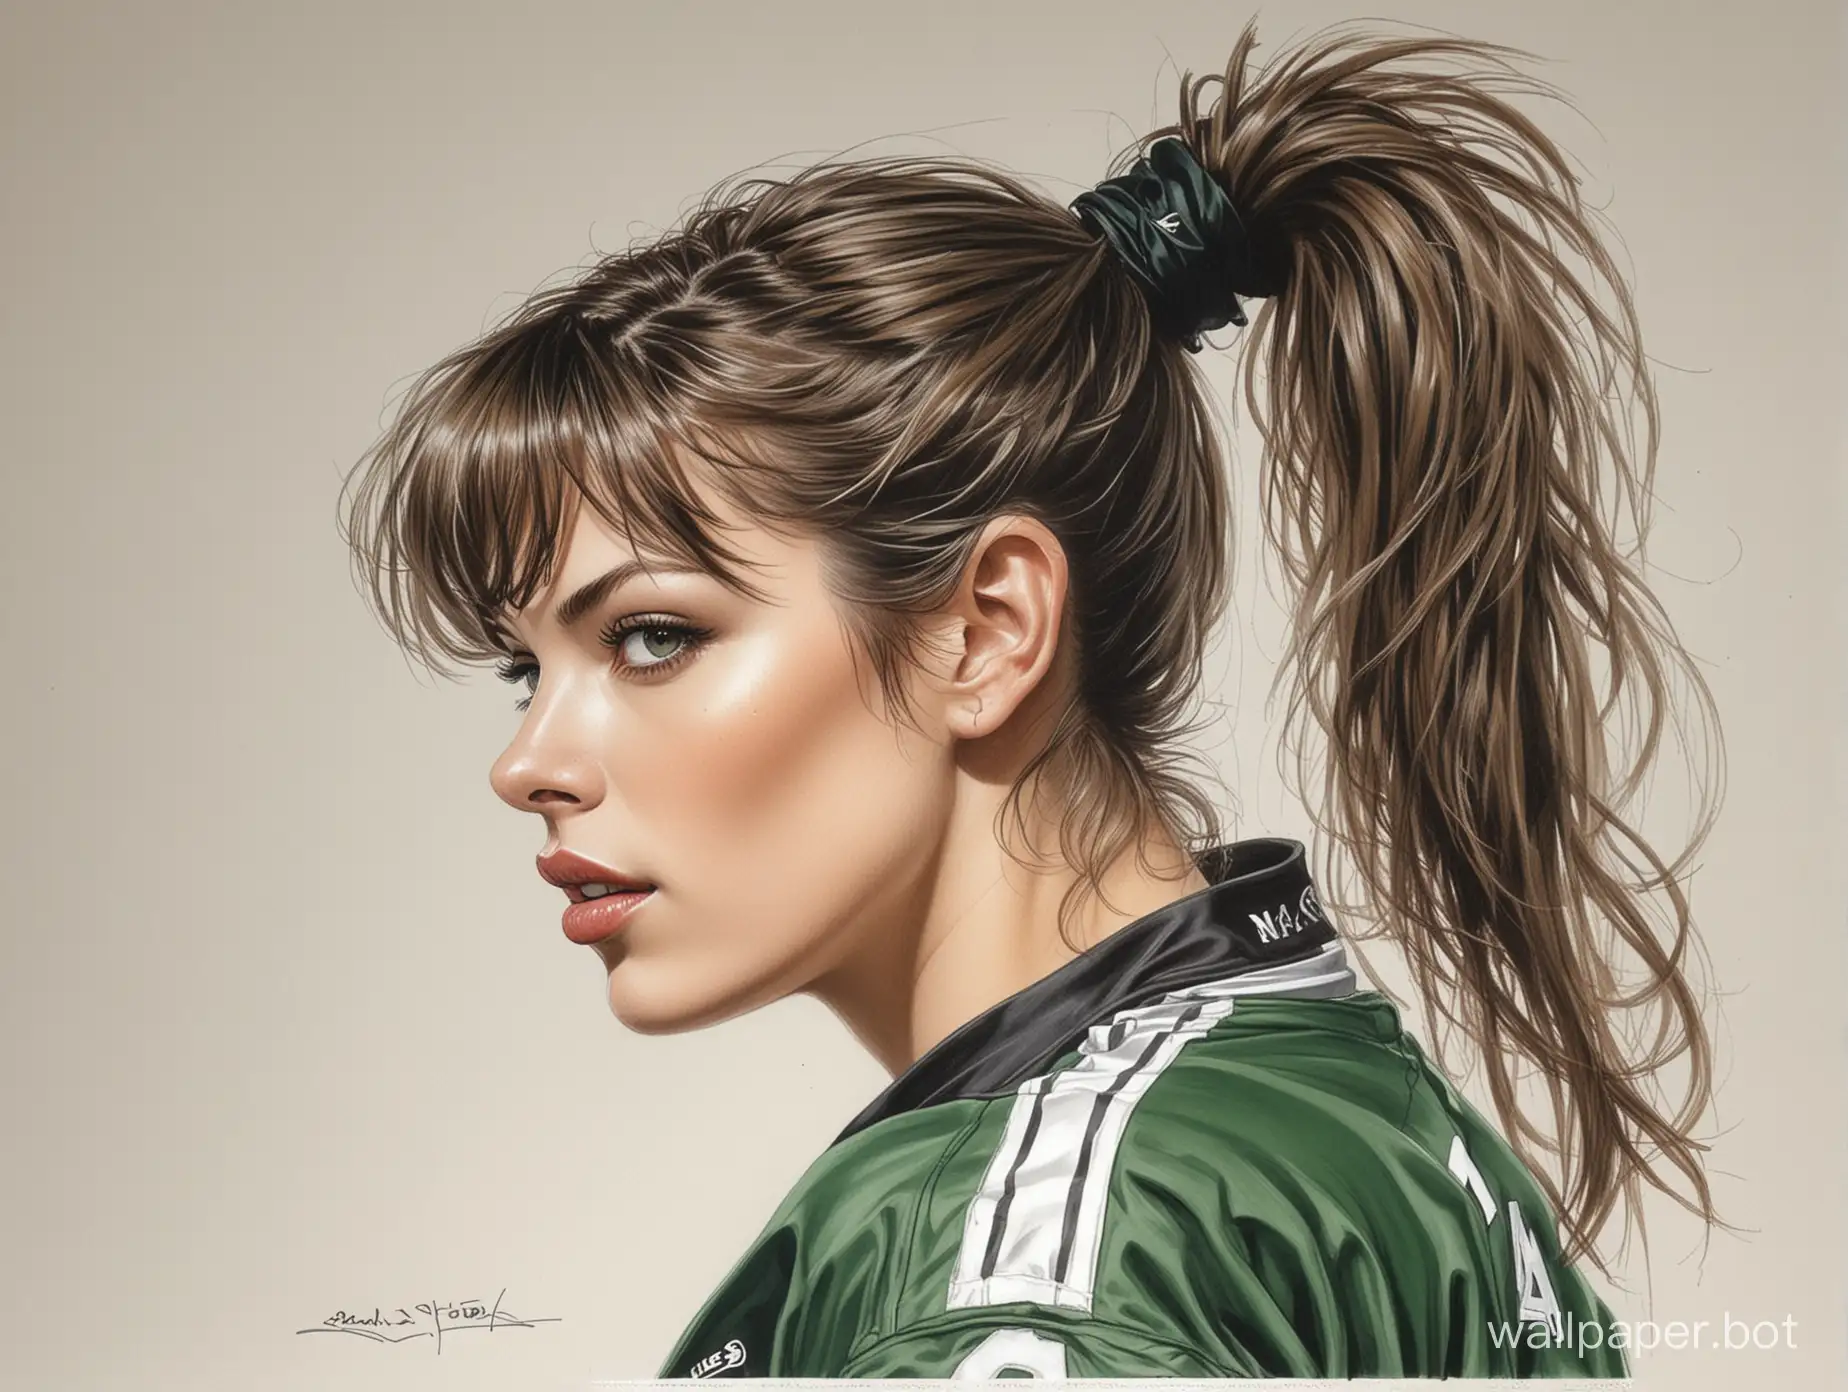 sketch Mila Jovovich  25 years old light hair with styling 6 breast size narrow waist In black-green soccer uniform white background marker sketch Style Luis Royo portrait